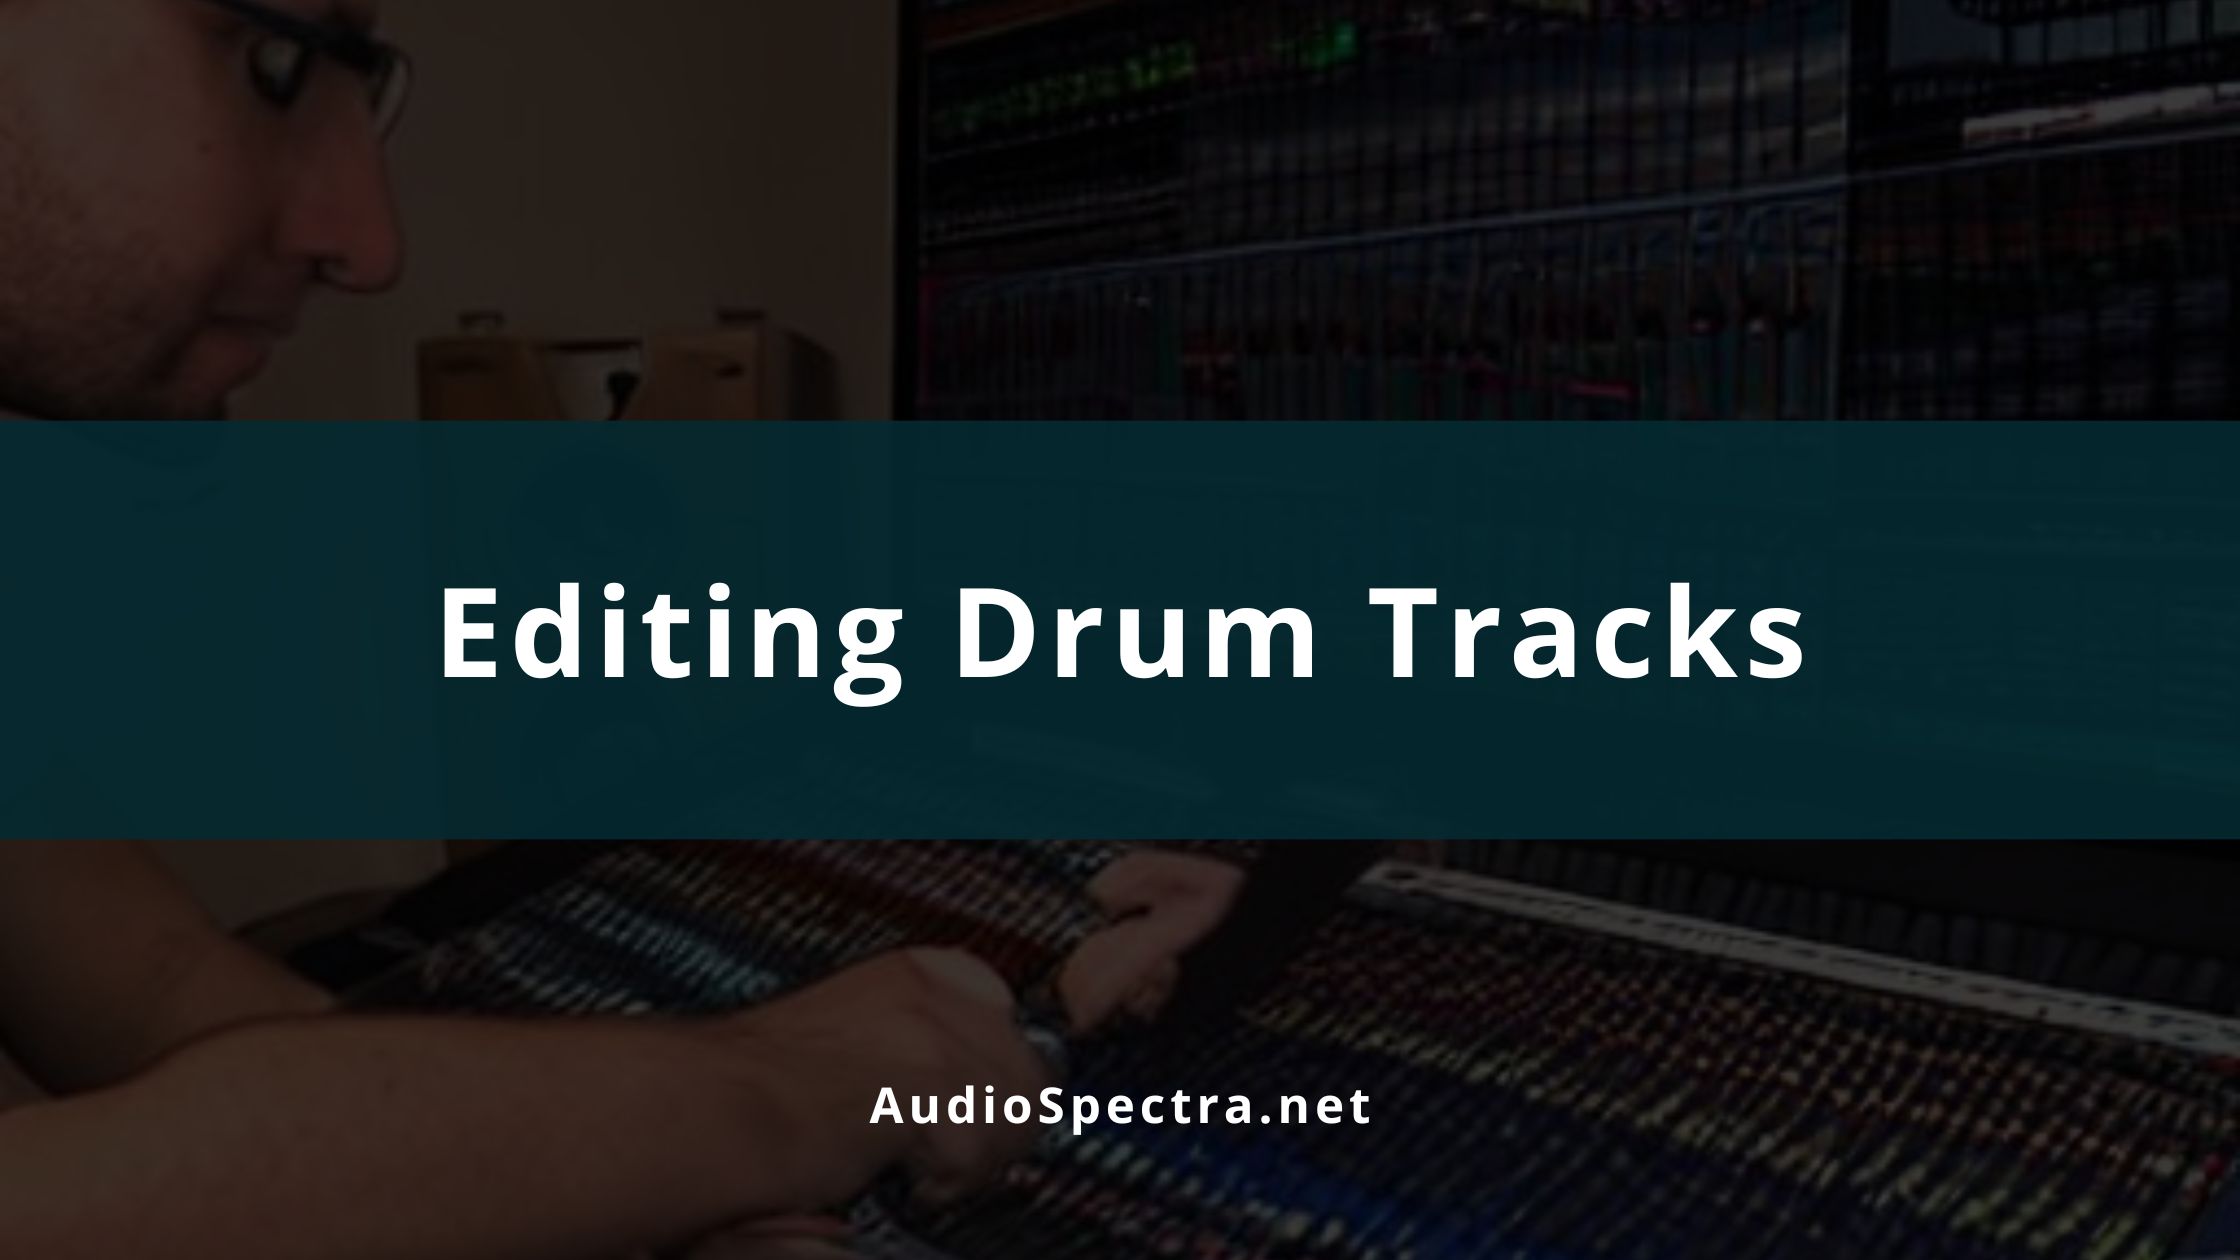 How to Edit Drums